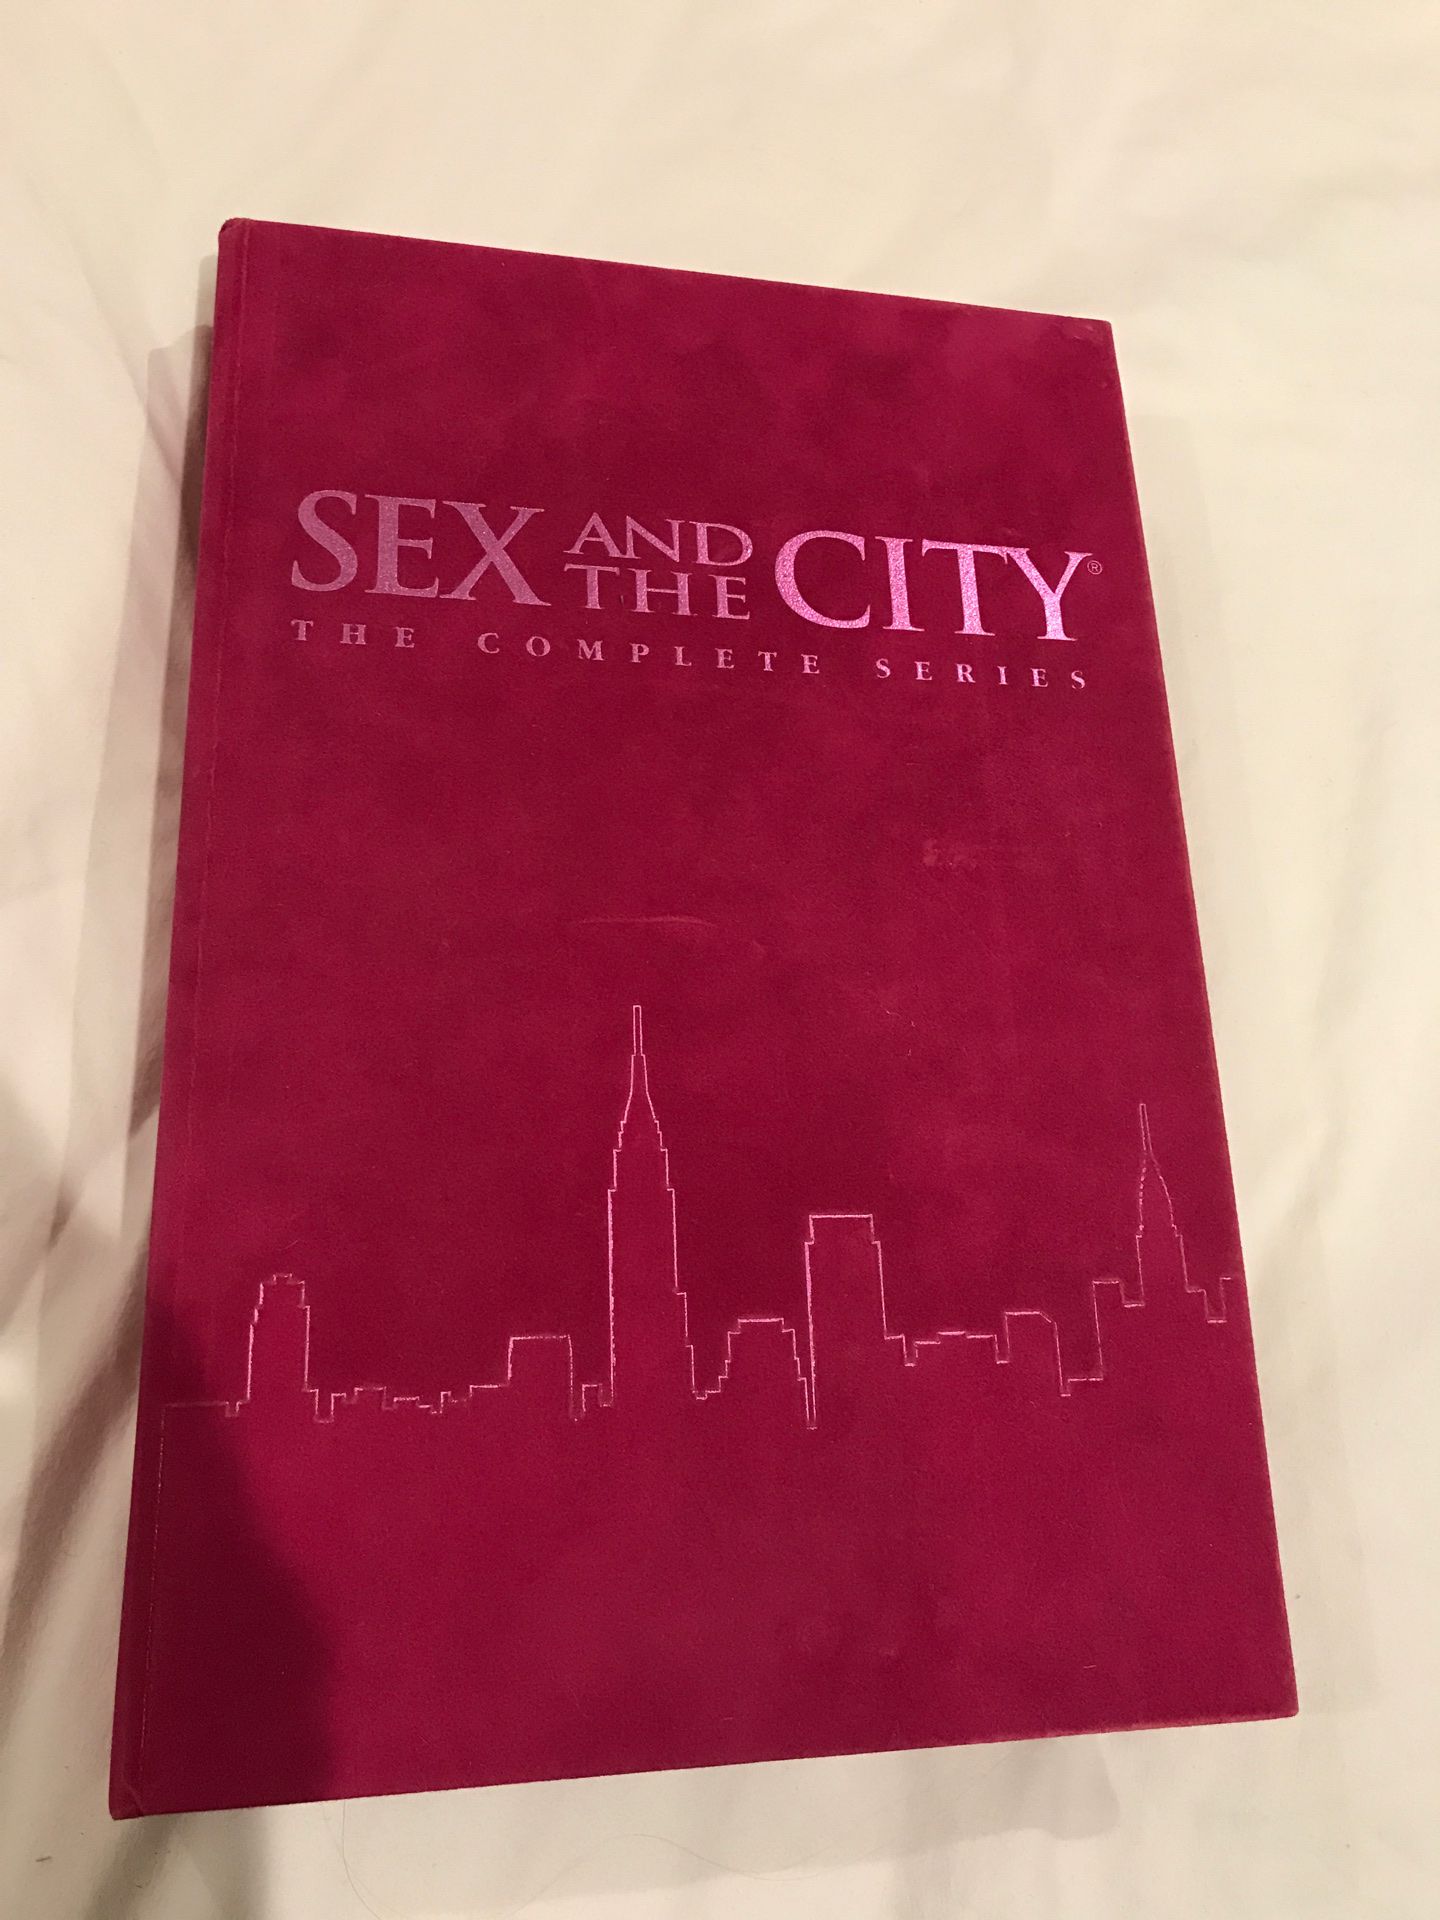 Sex and the City the complete series DVD collection